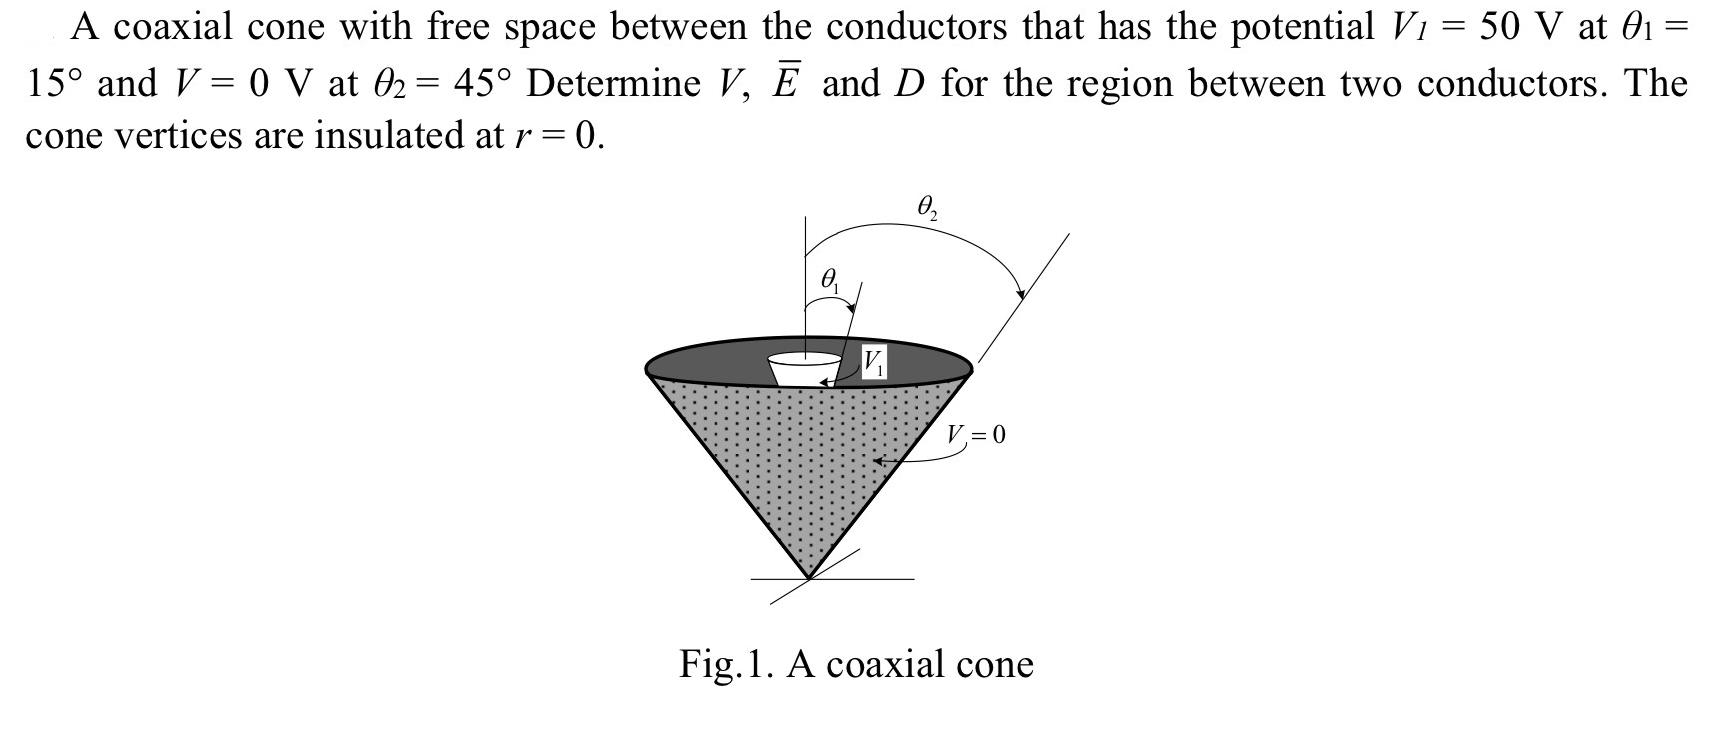 A coaxial cone with free space between the conductors that has the potential V = 50 V at 01: = 15 and V = 0 V